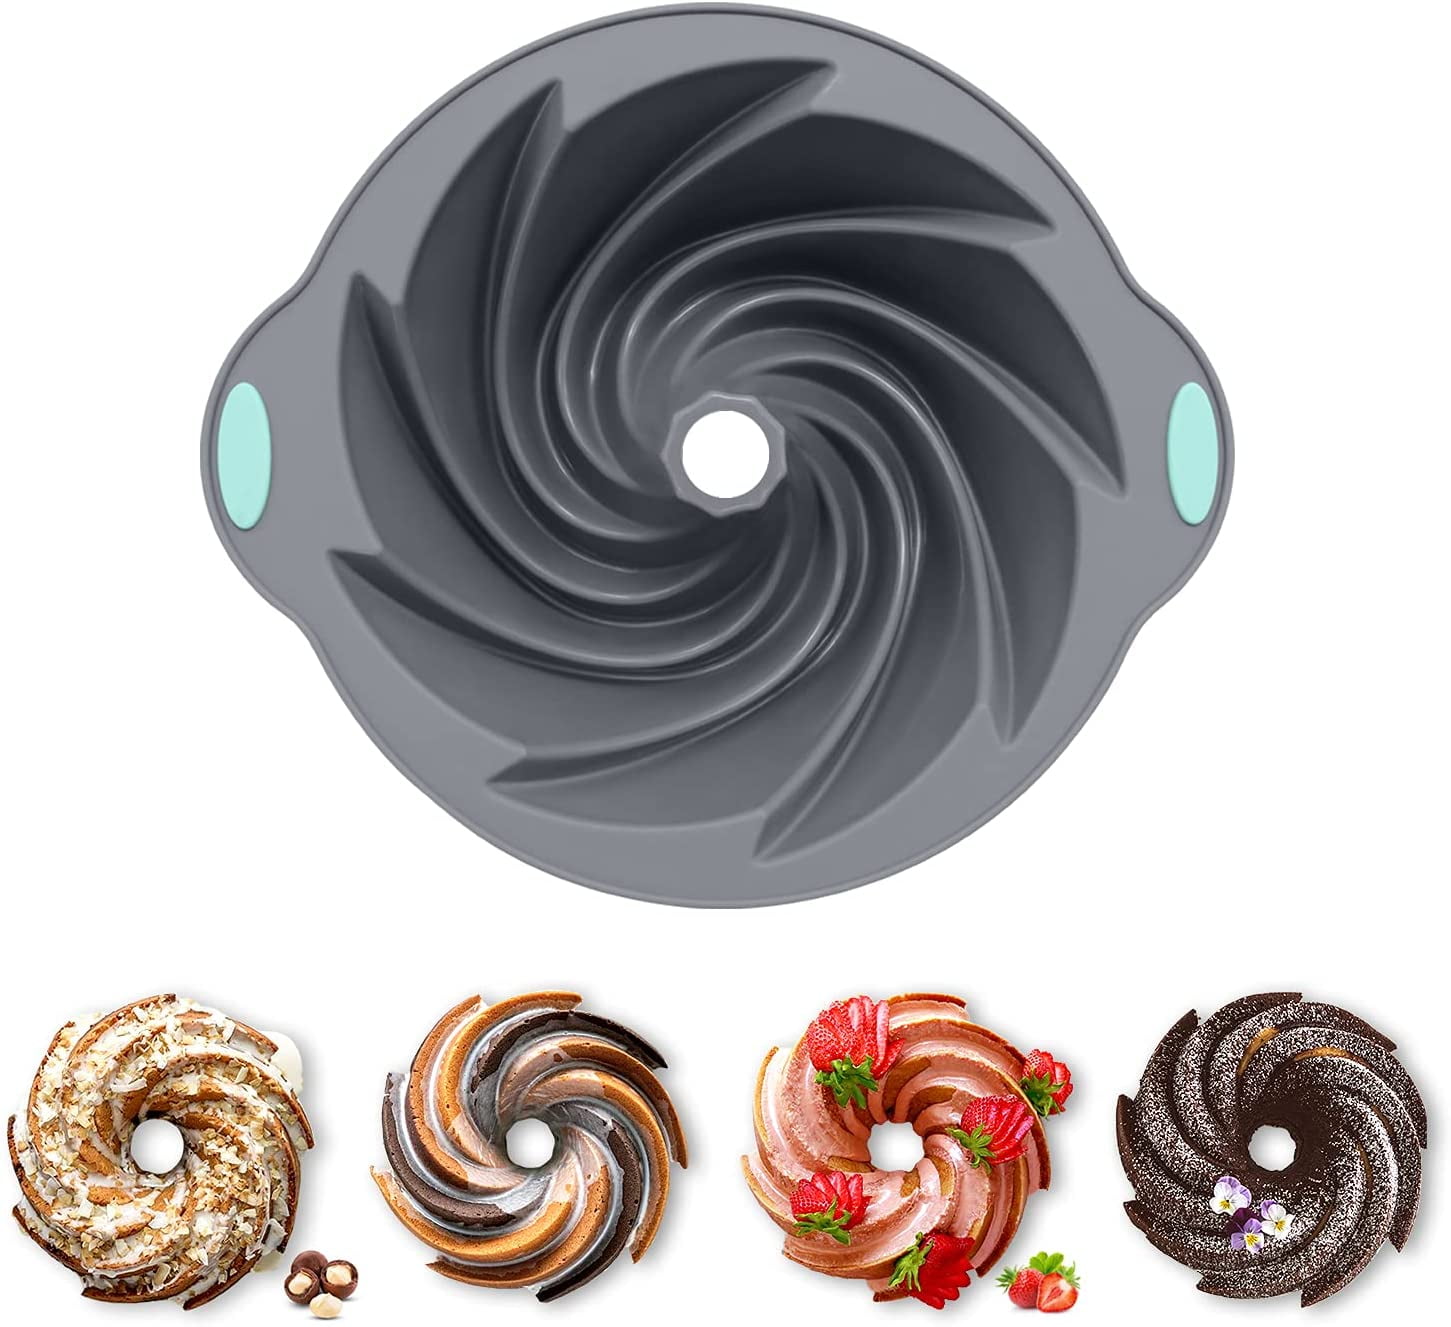 Delicious by design: This silicone bundt cake mold combines geometry and  confectionery! - Yanko Design